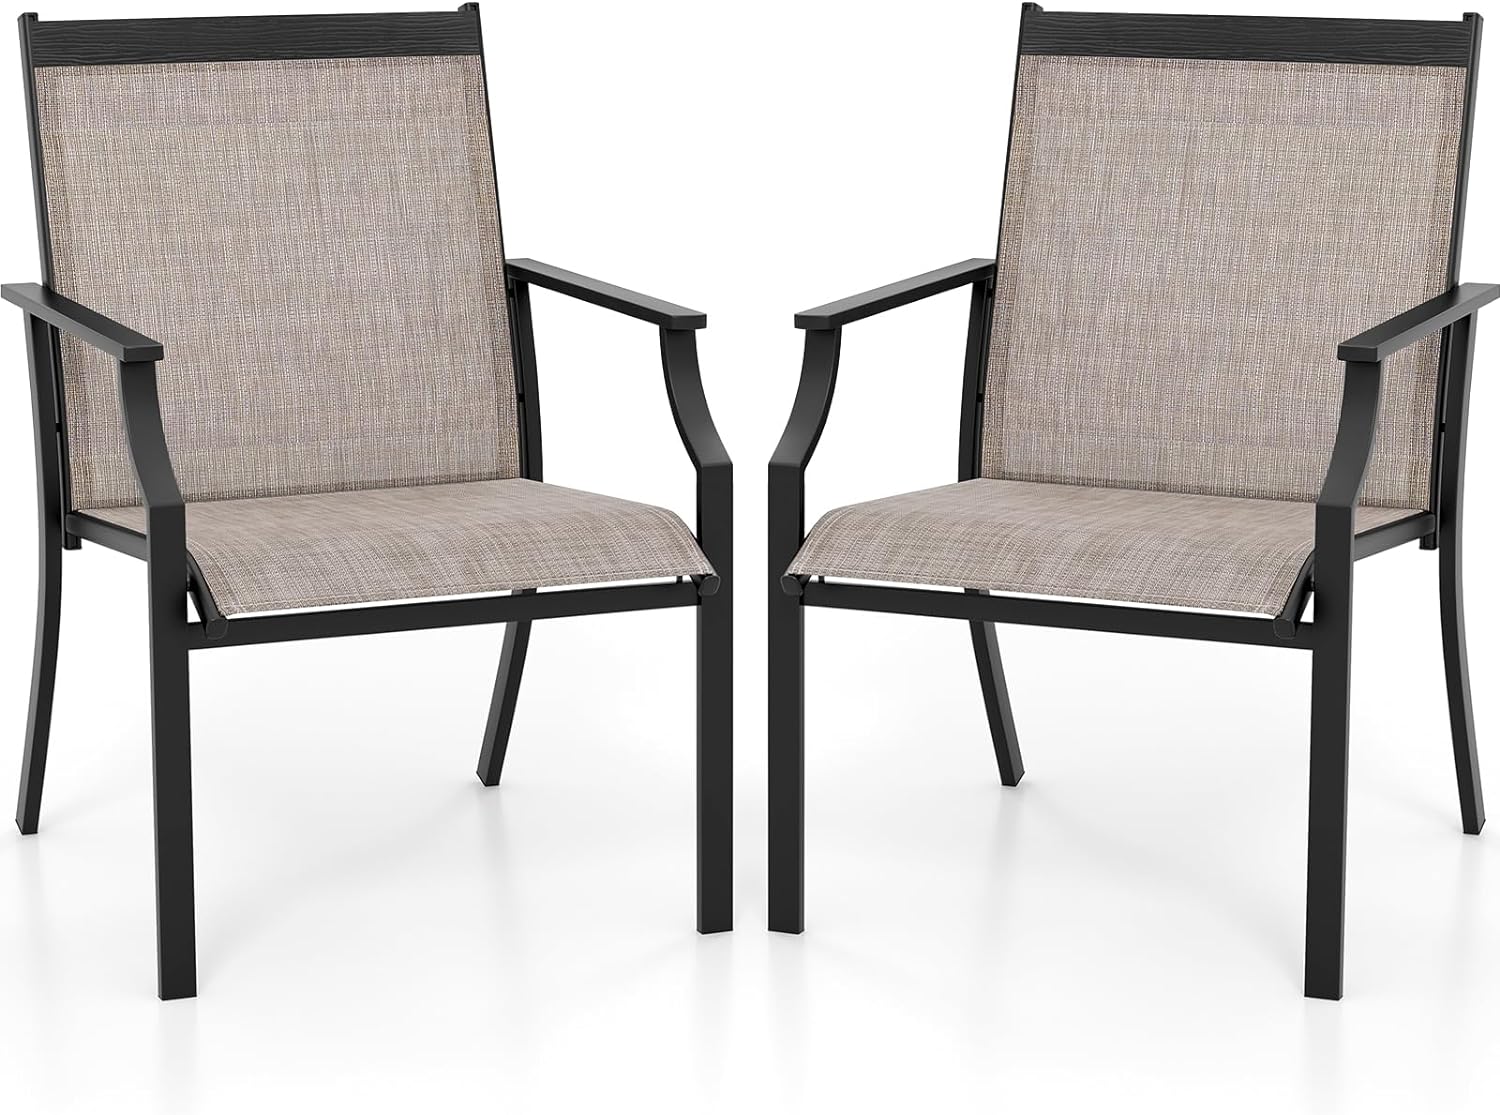 Giantex Patio Chairs Set of 2, All Weather Resistant Outdoor Chairs for Front Porch Lawn Garden Yard